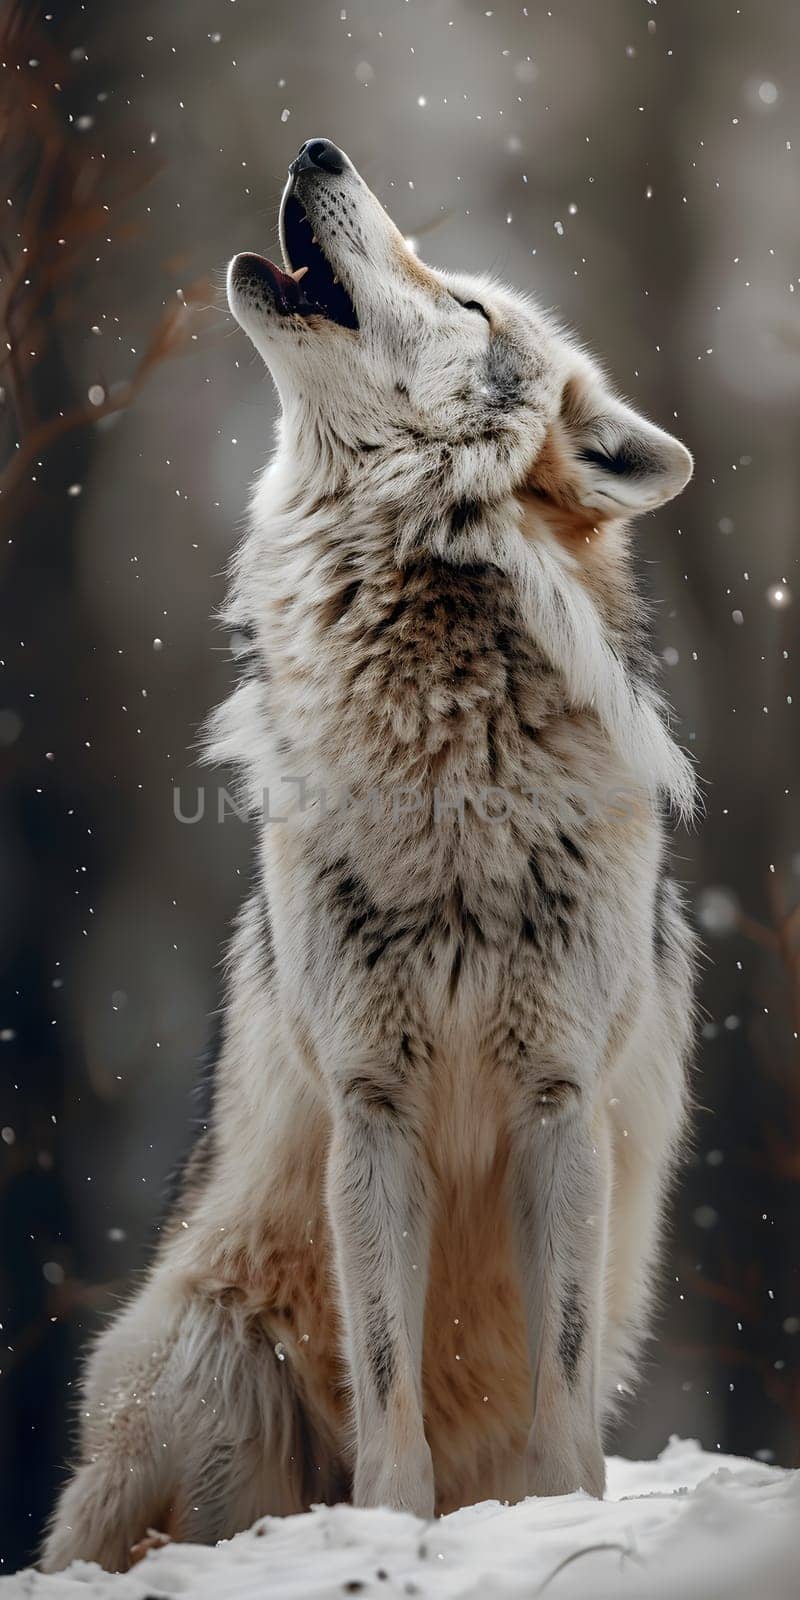 A Carnivore from the Canidae family, the wolf is howling with its distinctive snout and fur in the snowy wilderness. This terrestrial animal resembles a large Dog breed